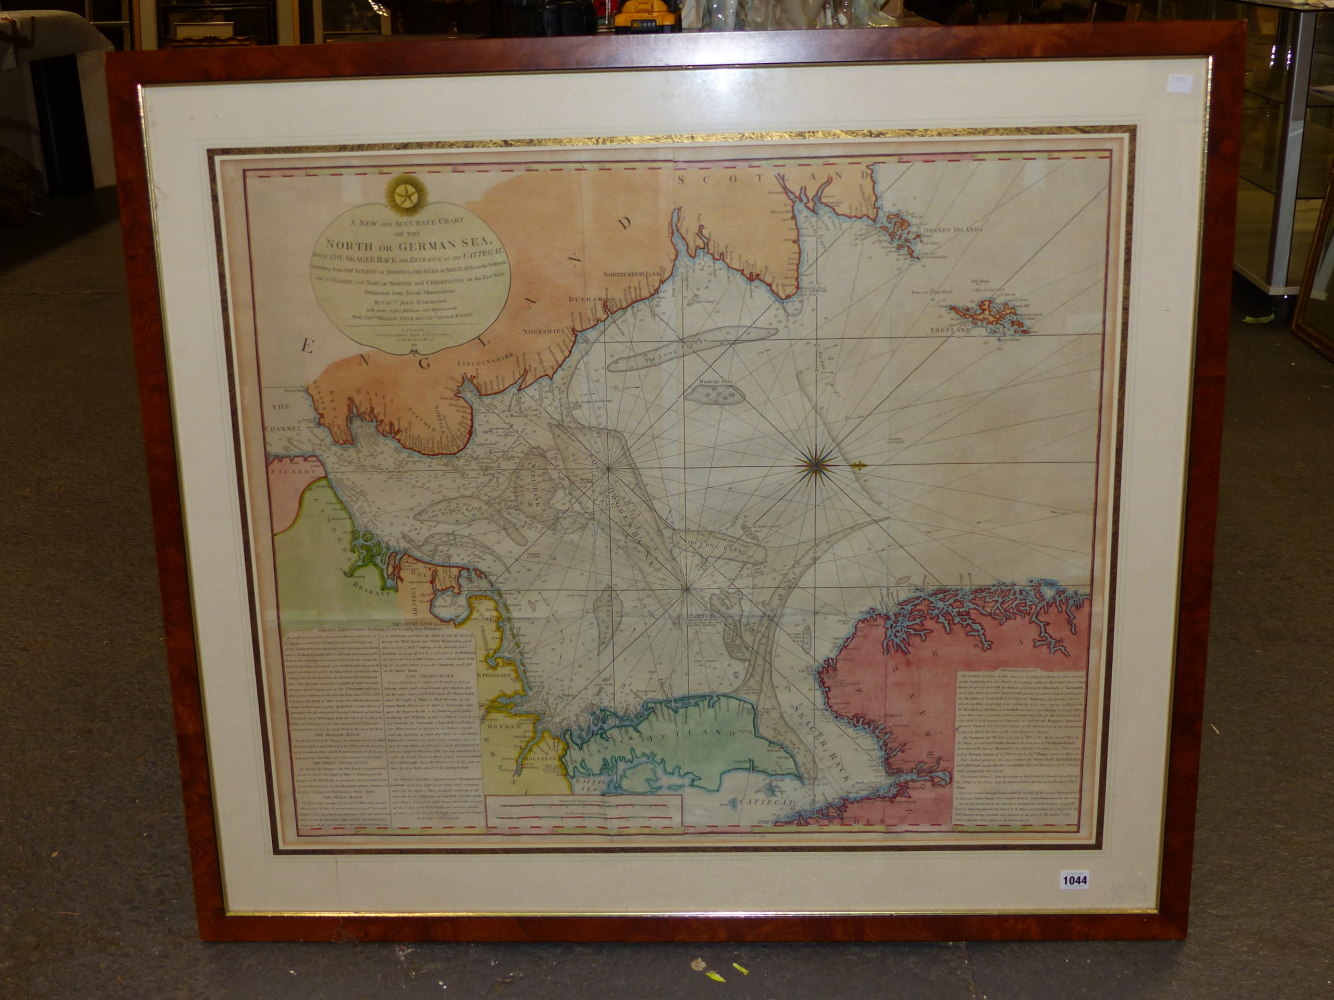 LATE 18th.C. HAND COLOURED MARINE MAP/CHART OF THE NORTH OR GERMAN SEA. 74 x 88cms. - Image 5 of 6